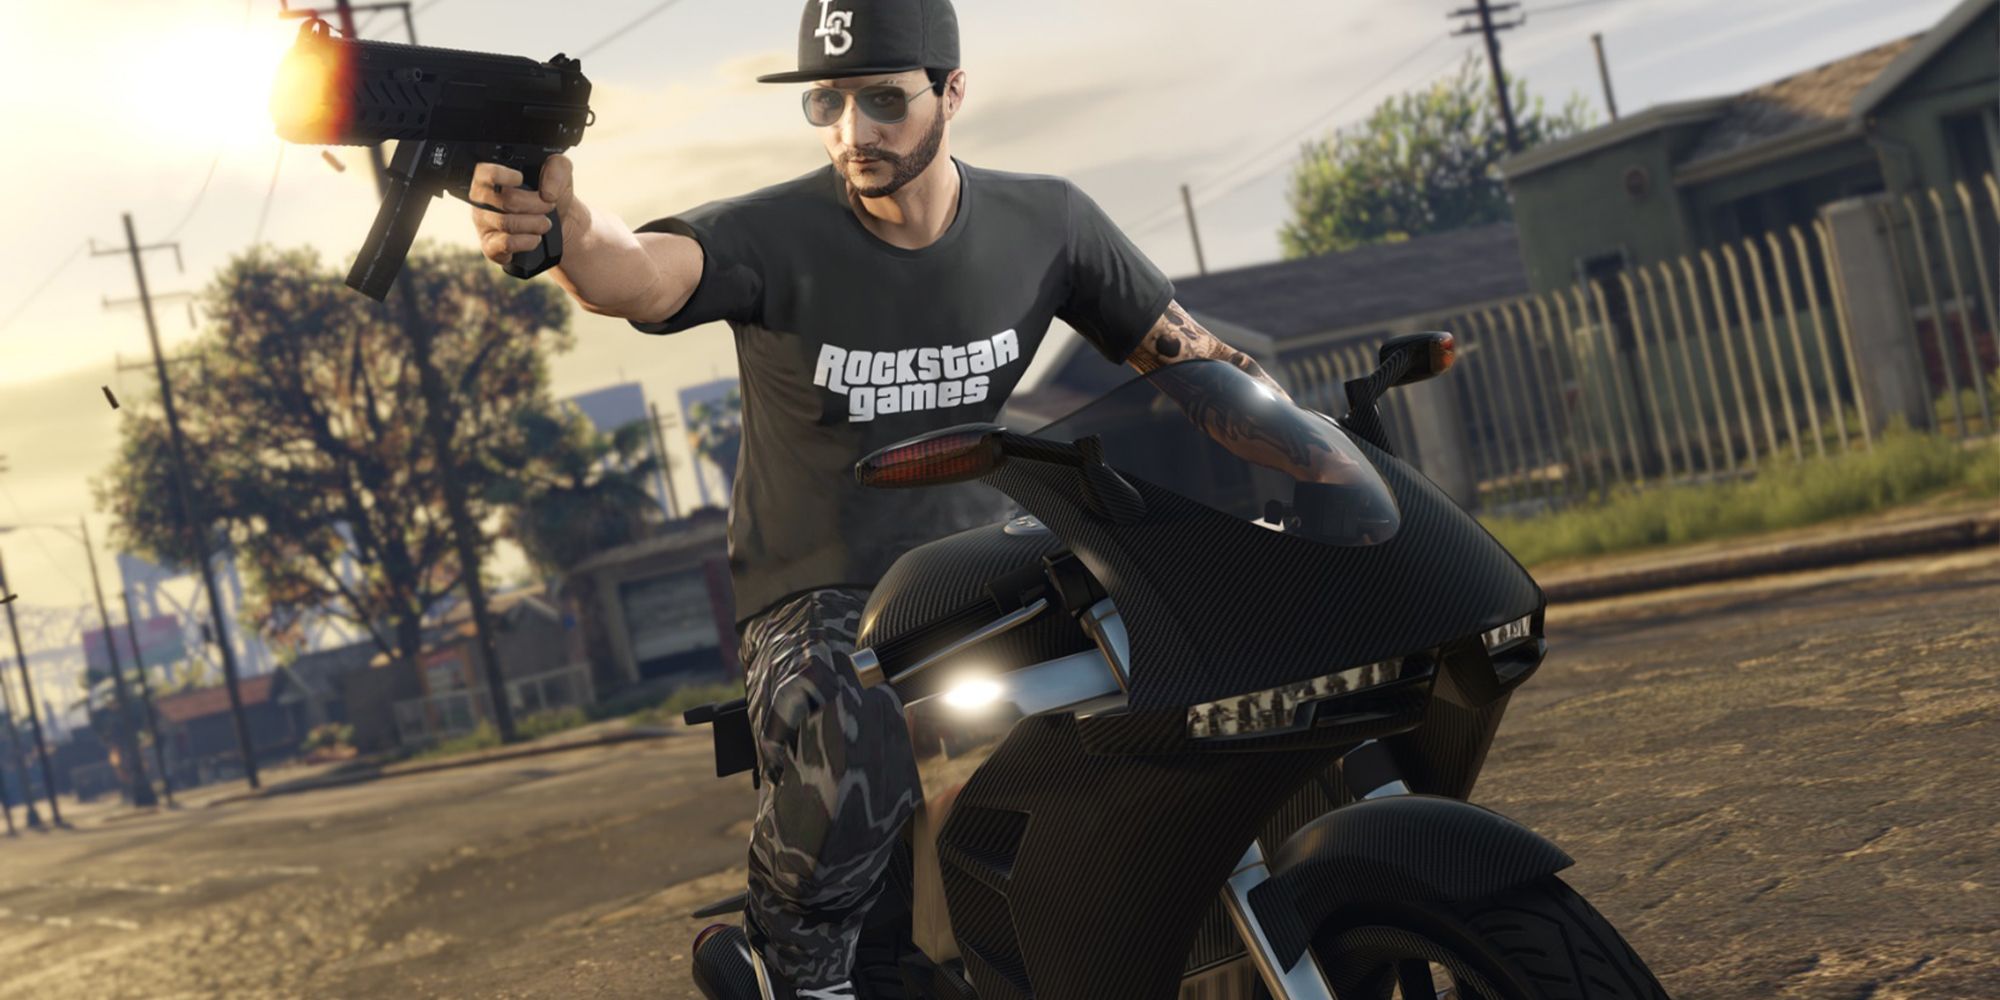 GTA online character shooting from a bike